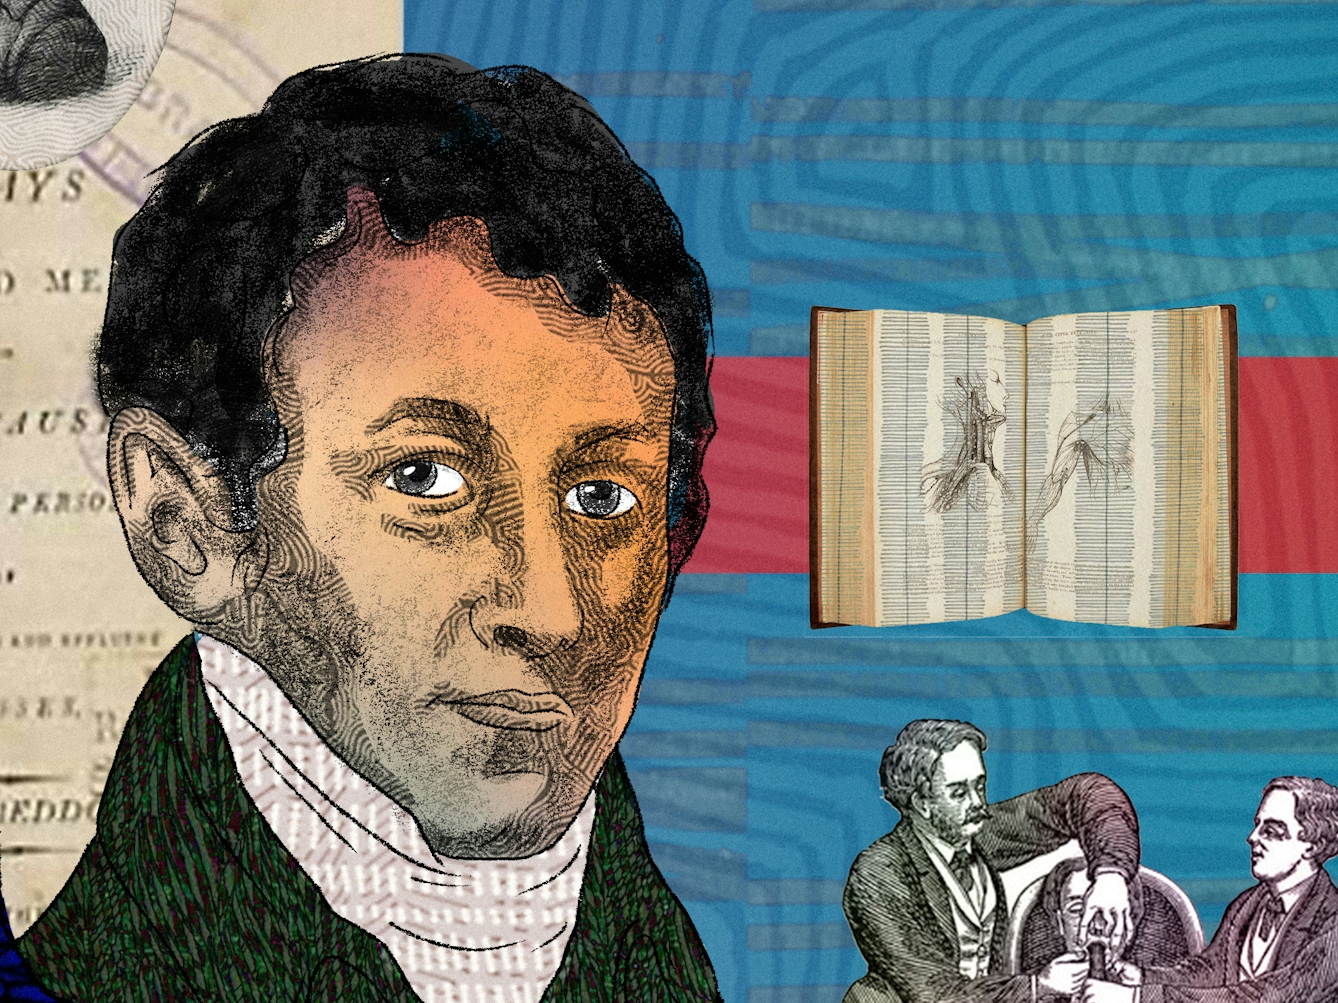 A detail from a larger abstract digital illustration featuring two head and shoulders portraits of two males posed back to back, depicting the writer philosopher Samuel Taylor Coleridge on the left and chemist Humphry Davy on the right. On the left side by Coleridge there is a romantic image of a red poppy flower as well as an opium pipe. To the right side by Davy there is an archive image of someone inhaling pain relief gas as part of a medical procedure. 